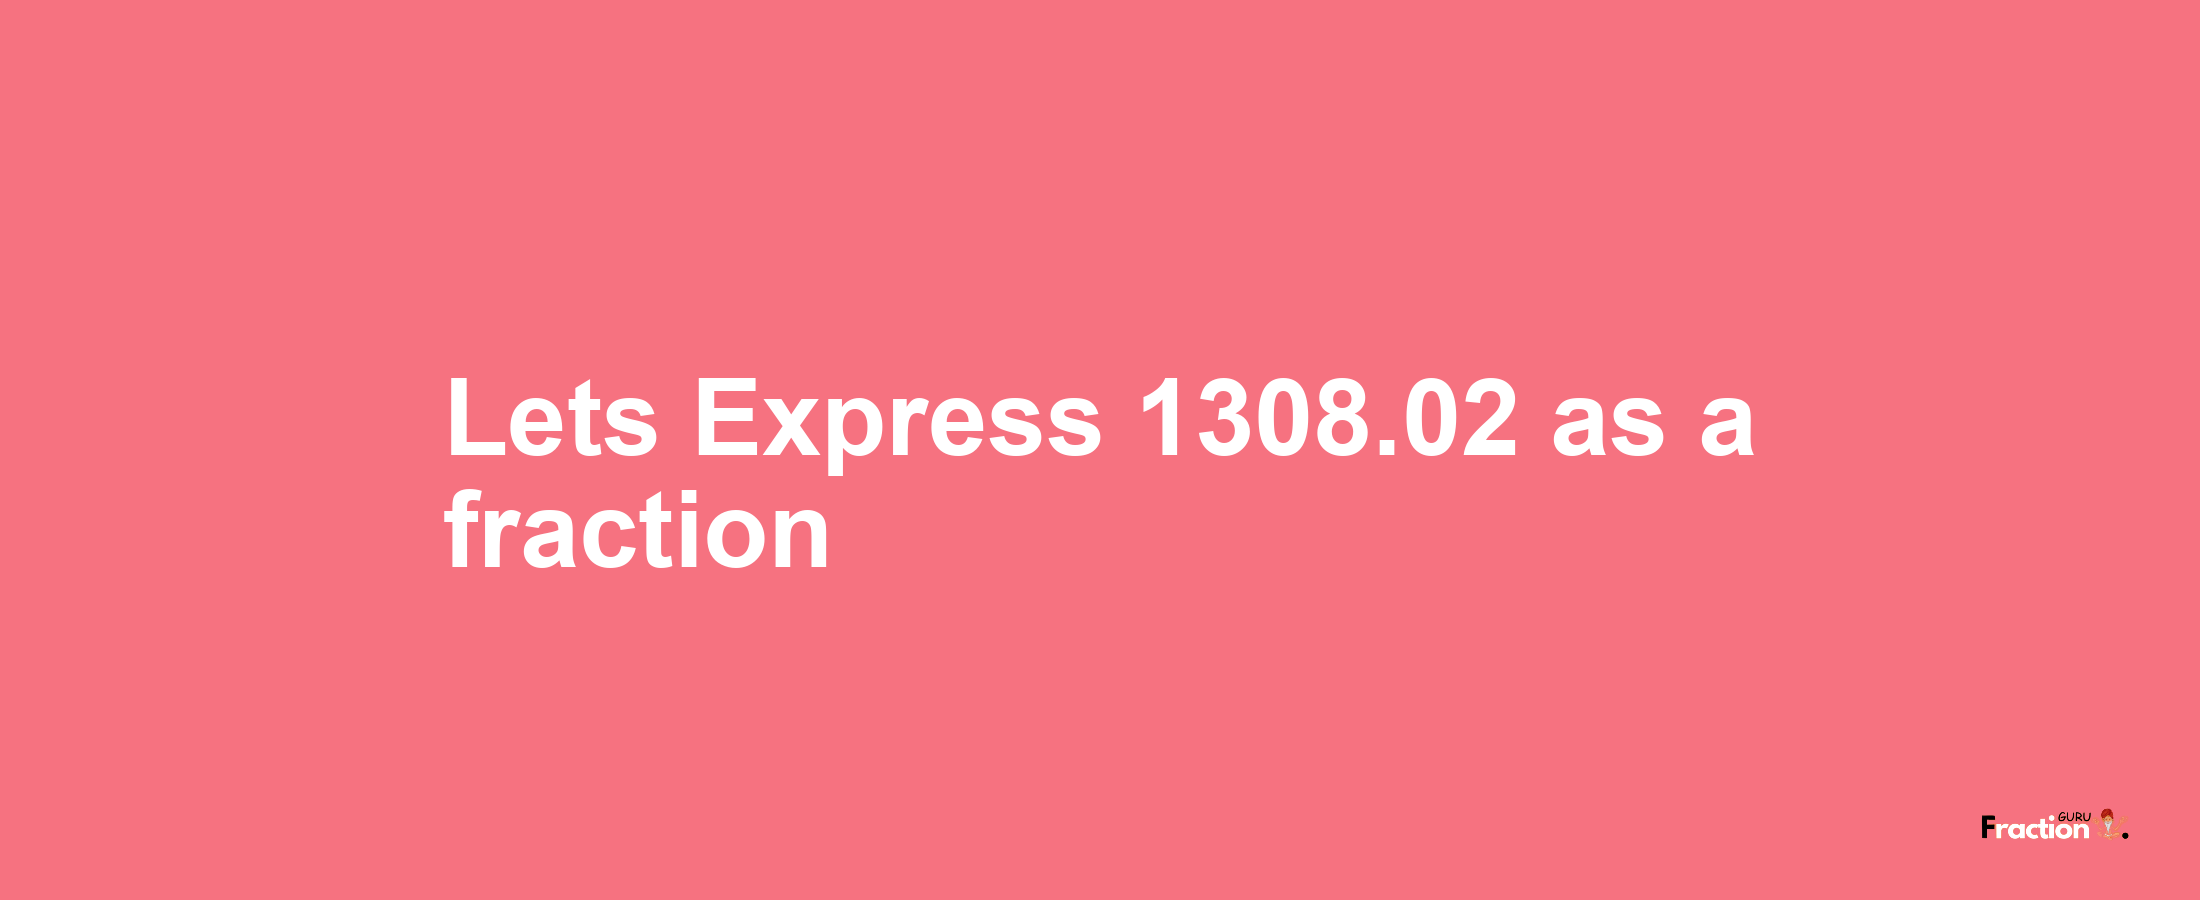 Lets Express 1308.02 as afraction